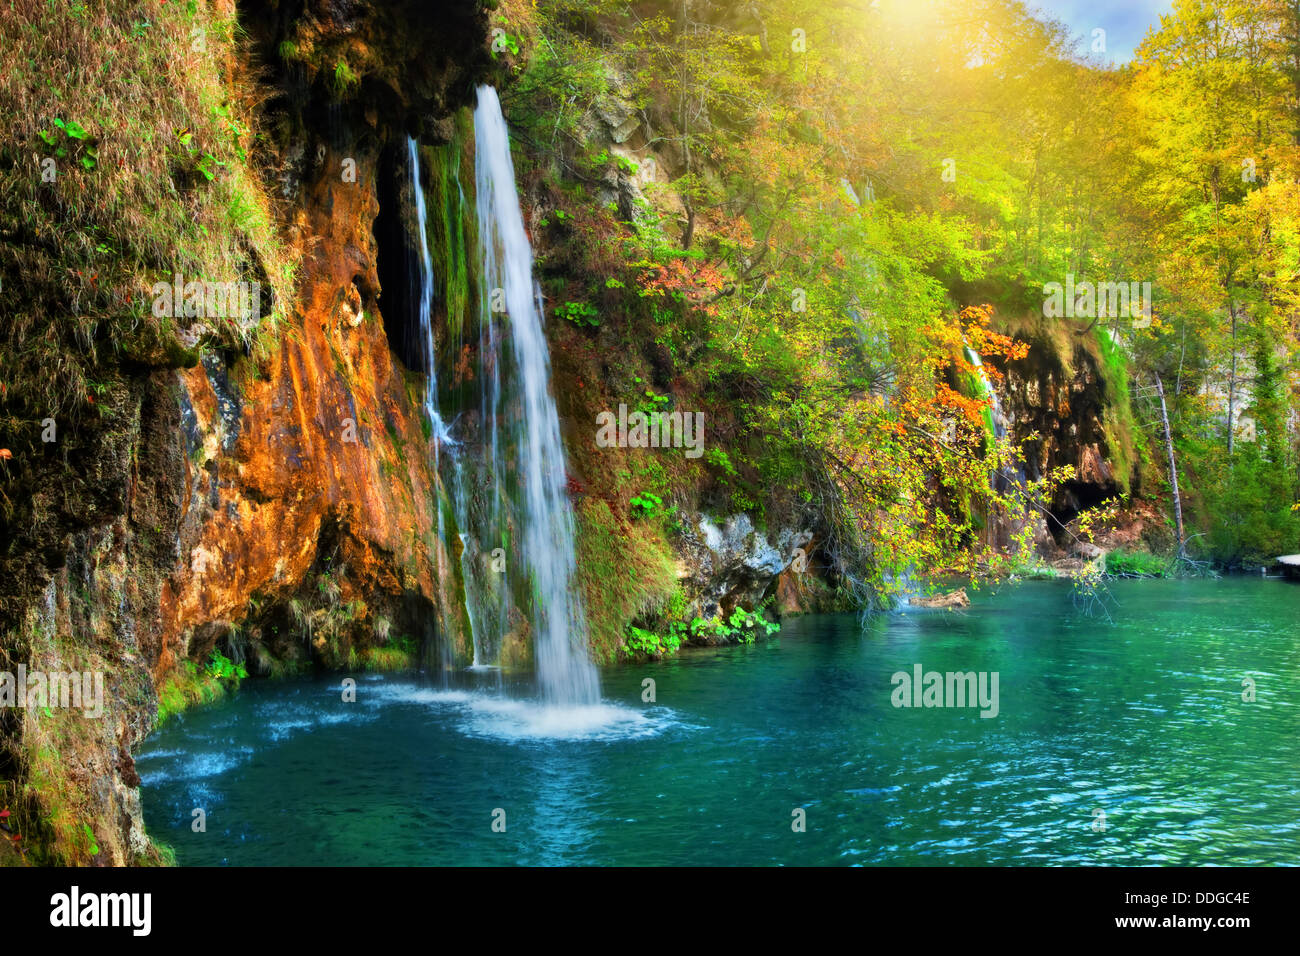 Waterfall in a forest in the Plitvice Lakes National Park, Croatia, Europe Stock Photo